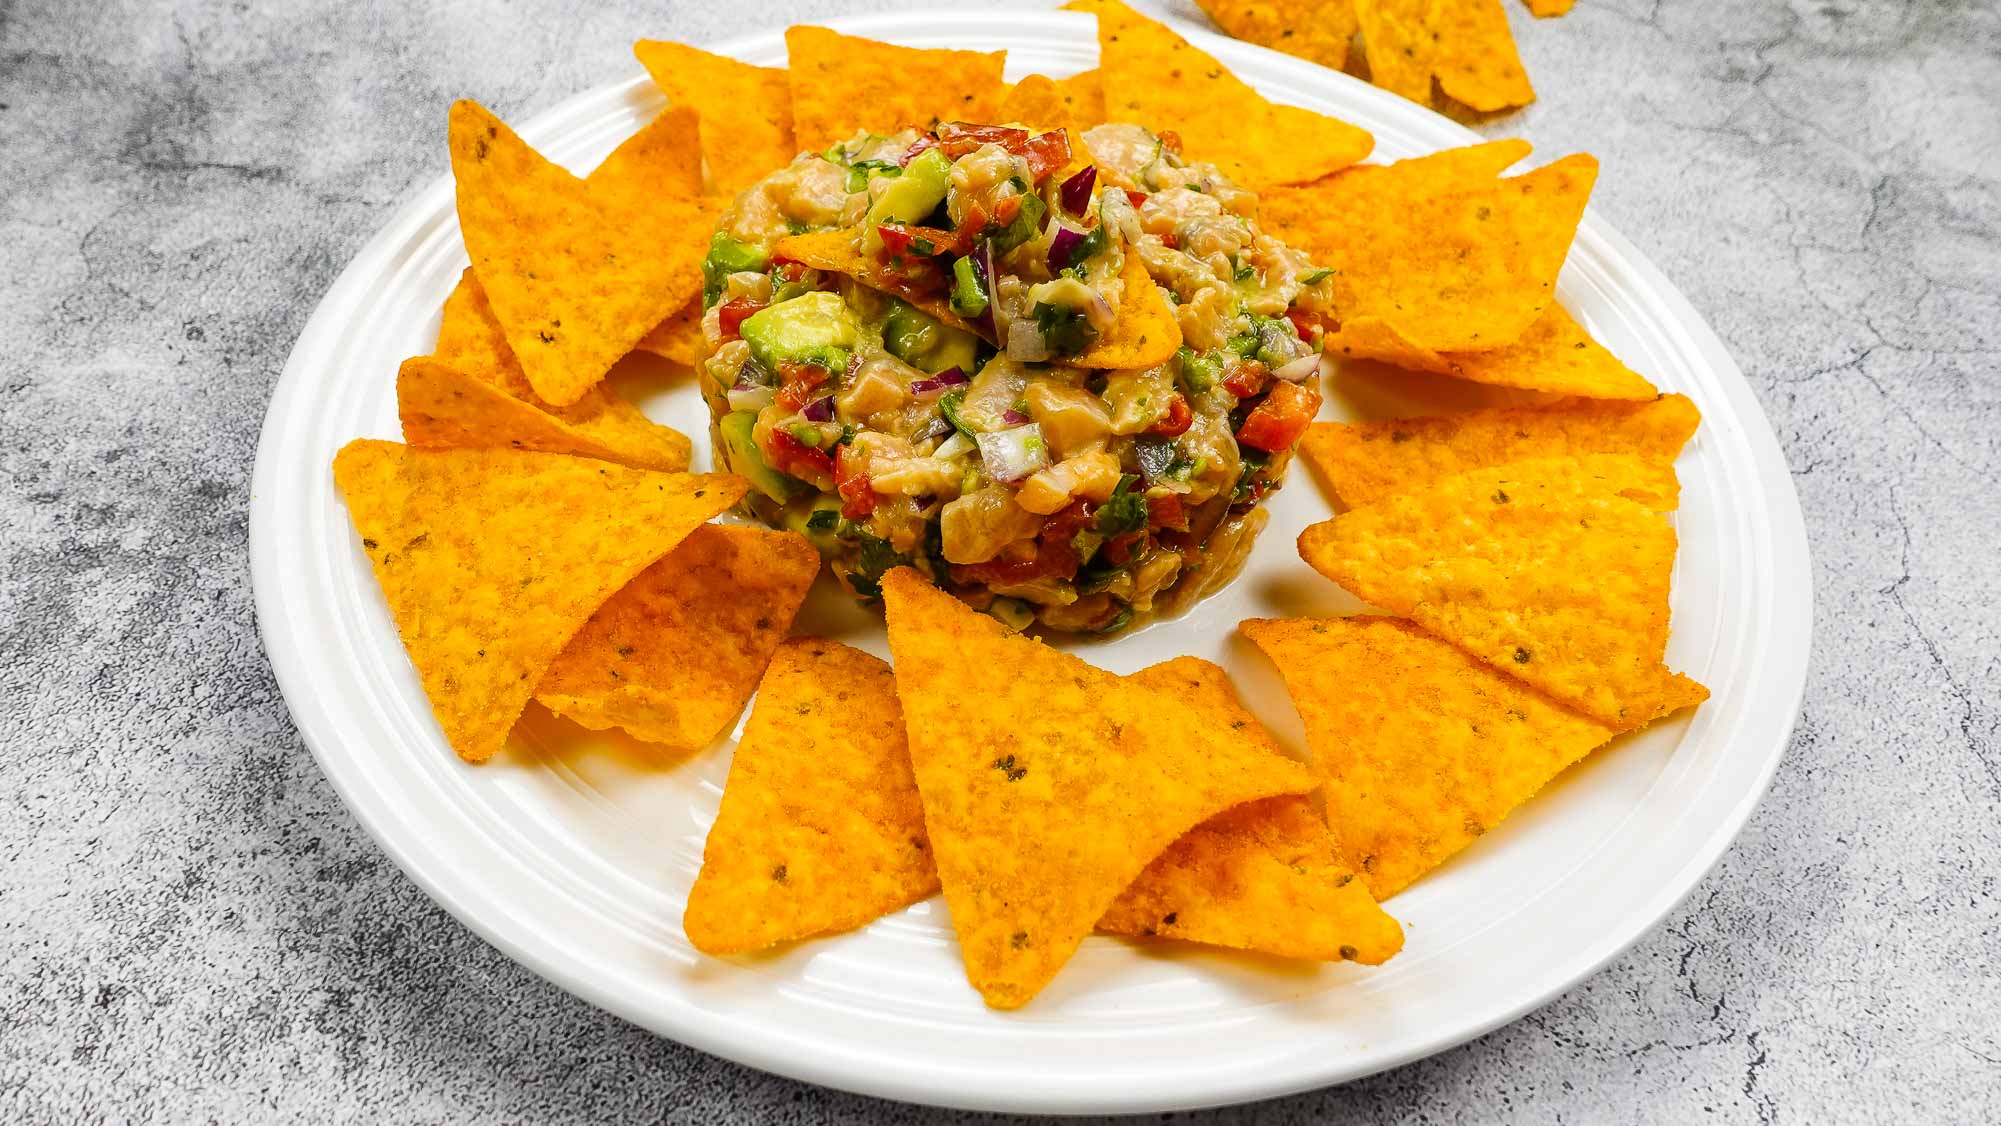 Spicy Salmon Tartare with Corn Chips on a white plate.